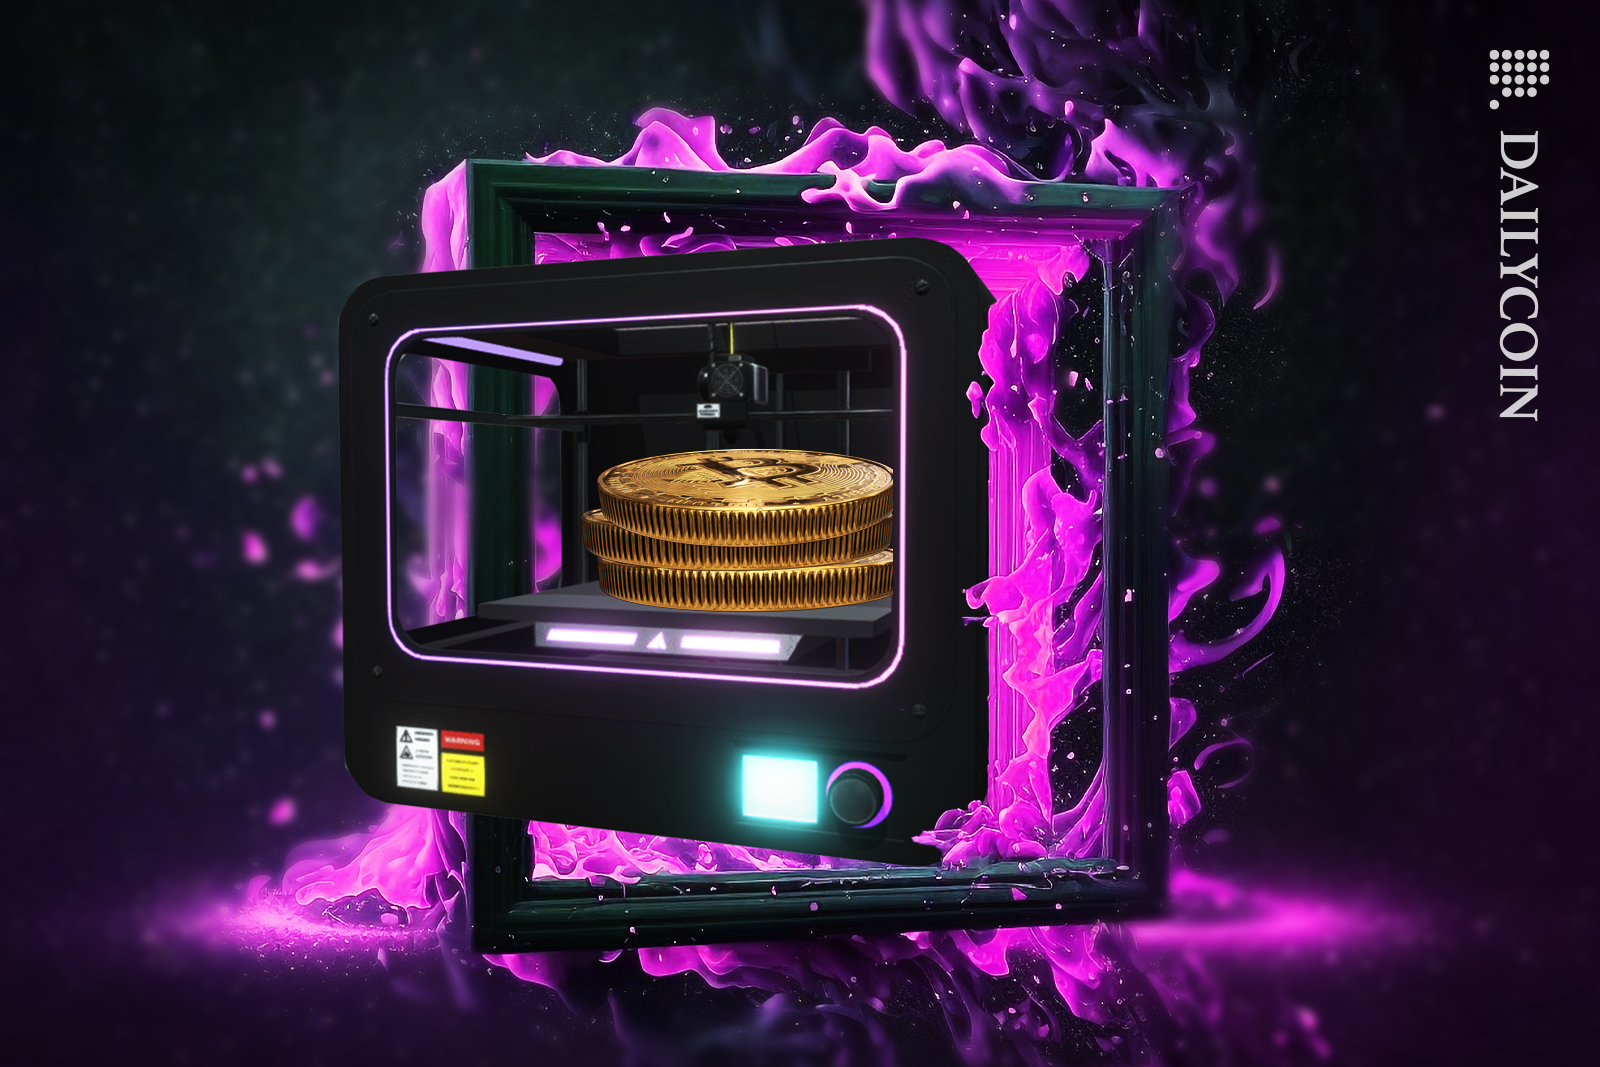 3D printer printing Bitcoins out of a magic box splashed with pink paint.